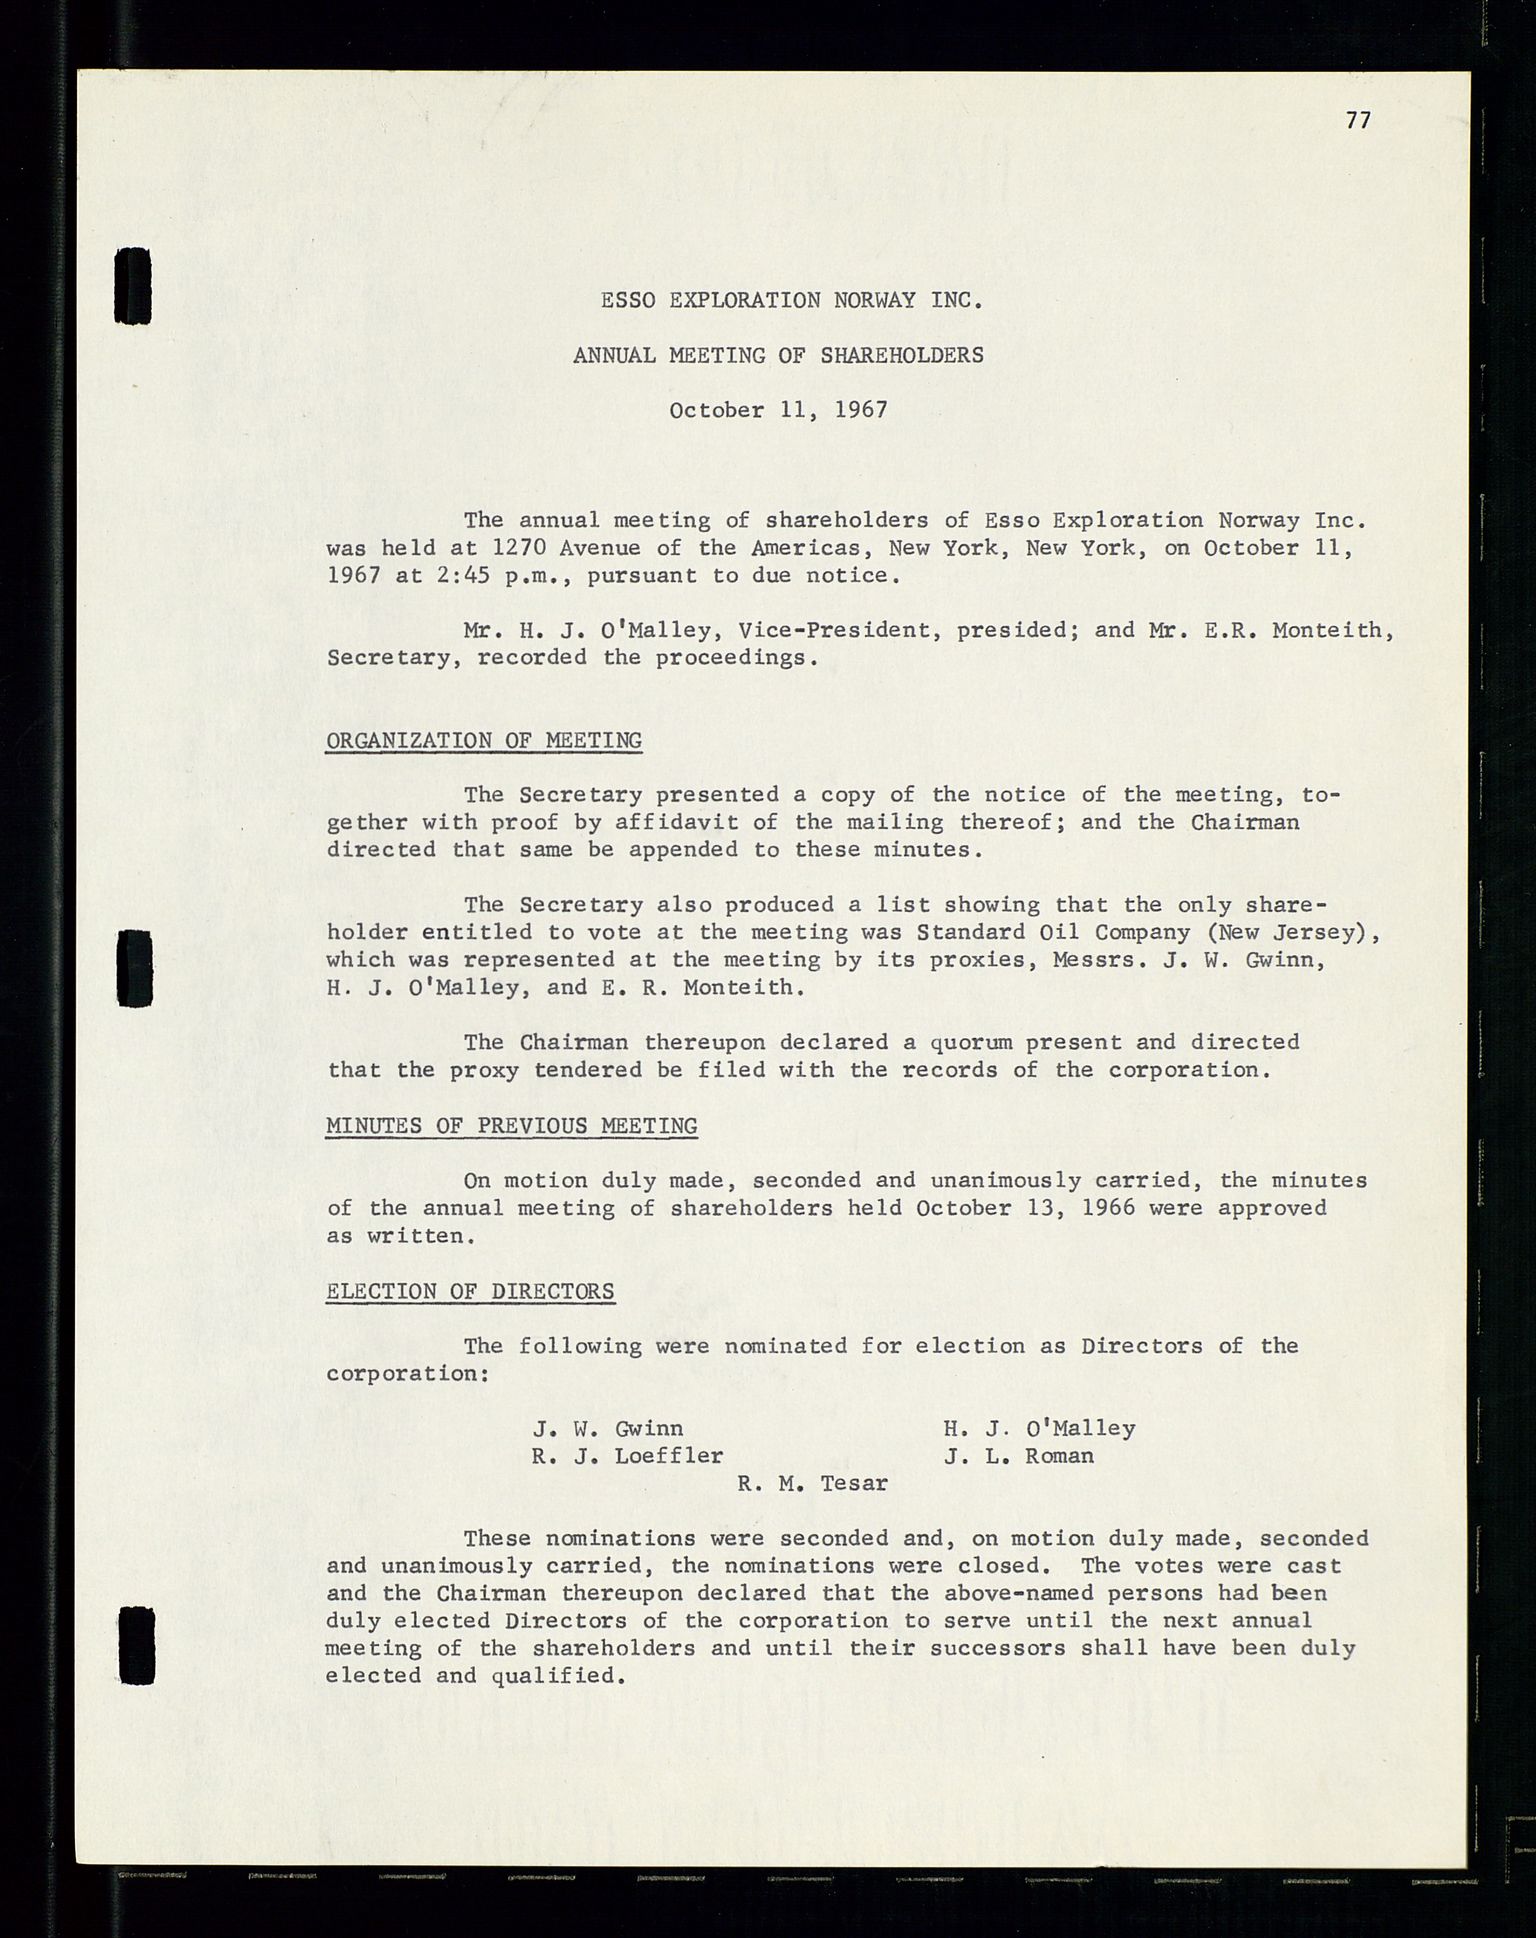 Pa 1512 - Esso Exploration and Production Norway Inc., SAST/A-101917/A/Aa/L0001/0001: Styredokumenter / Corporate records, By-Laws, Board meeting minutes, Incorporations, 1965-1975, s. 77